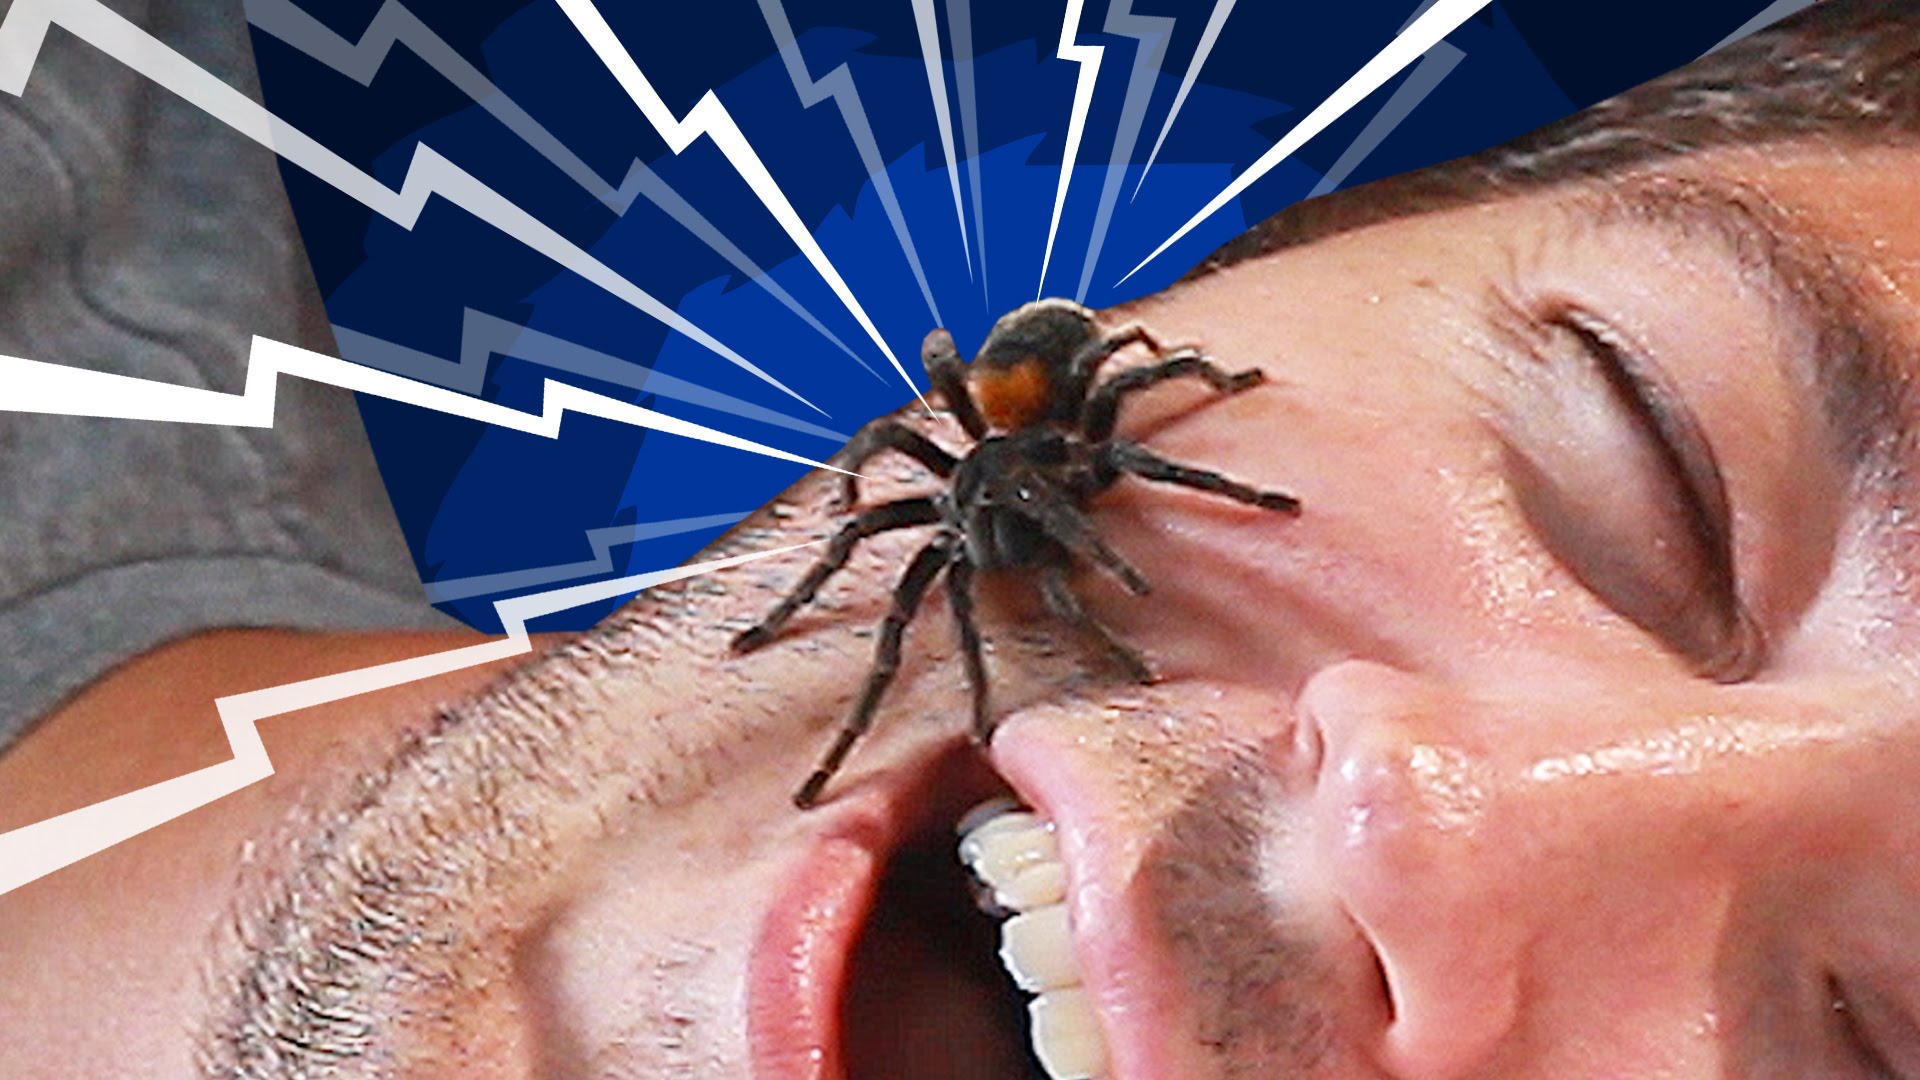 Do You Really Swallow Spiders When You Sleep? - YouTube